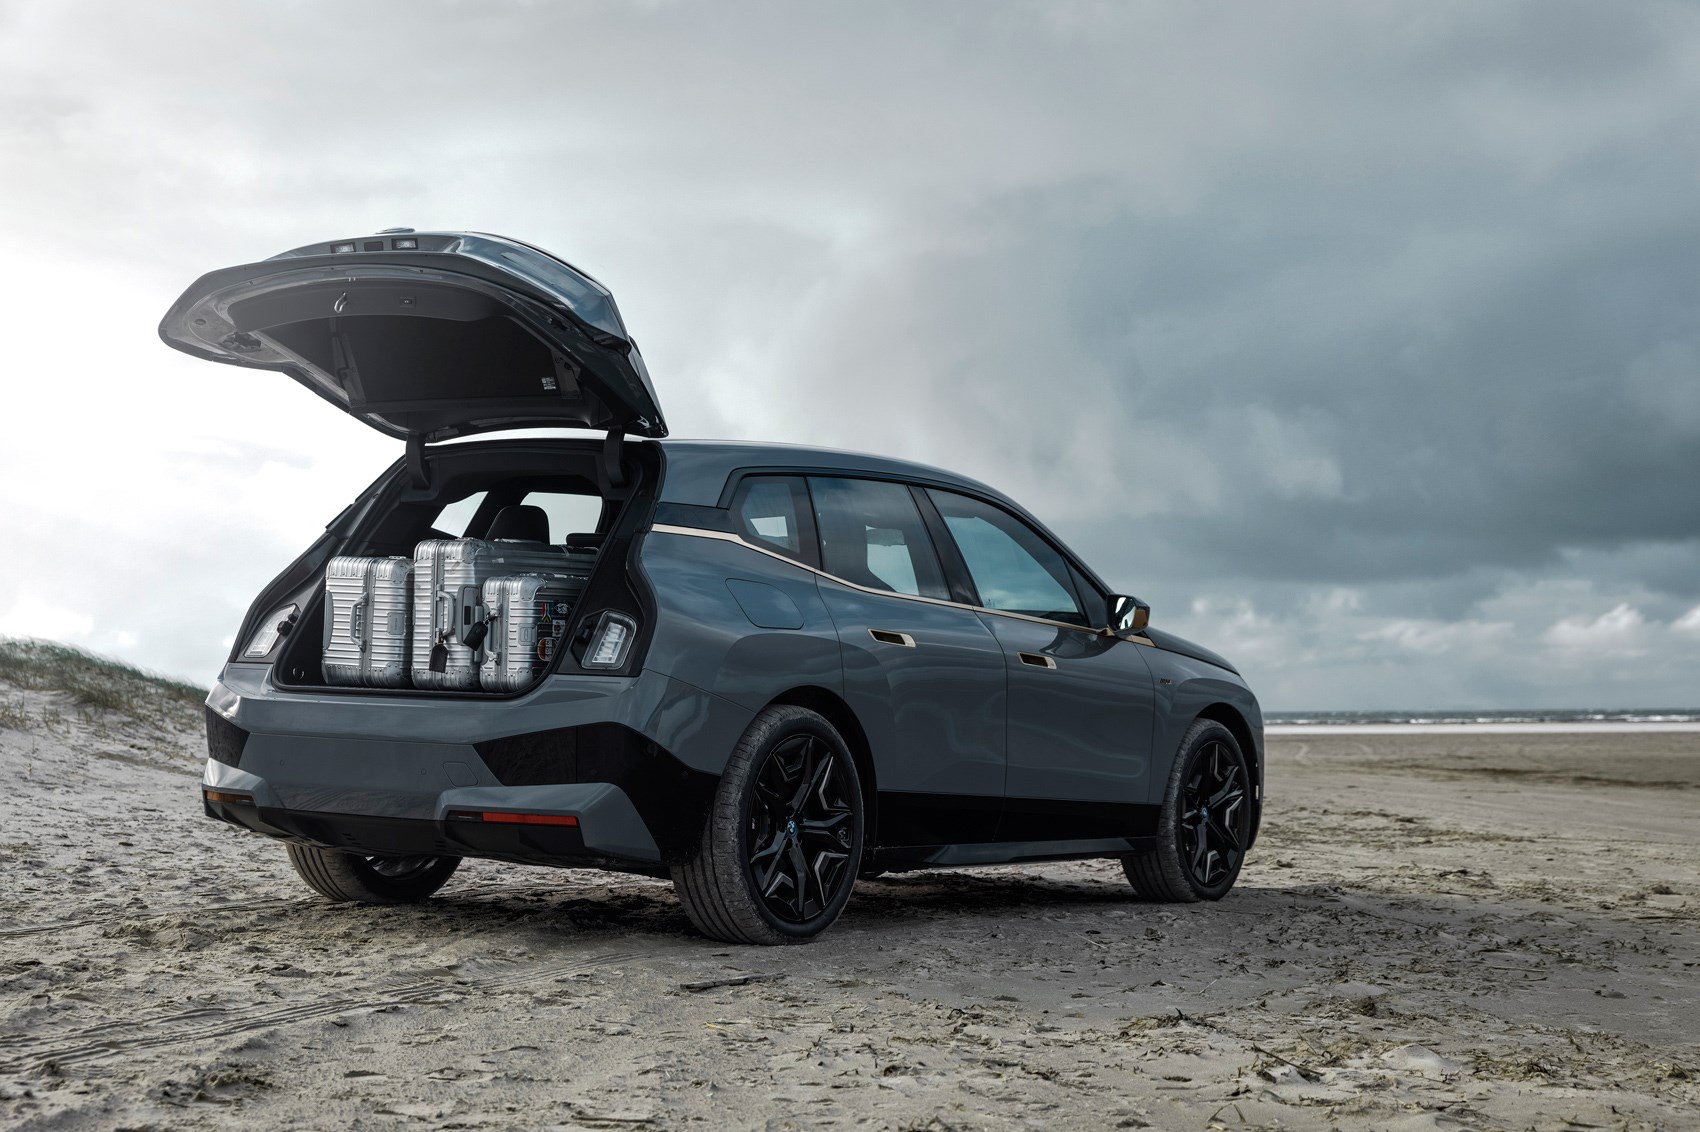 2021 BMW iX electric SUV first impressions: Styling, interiors, features  and range